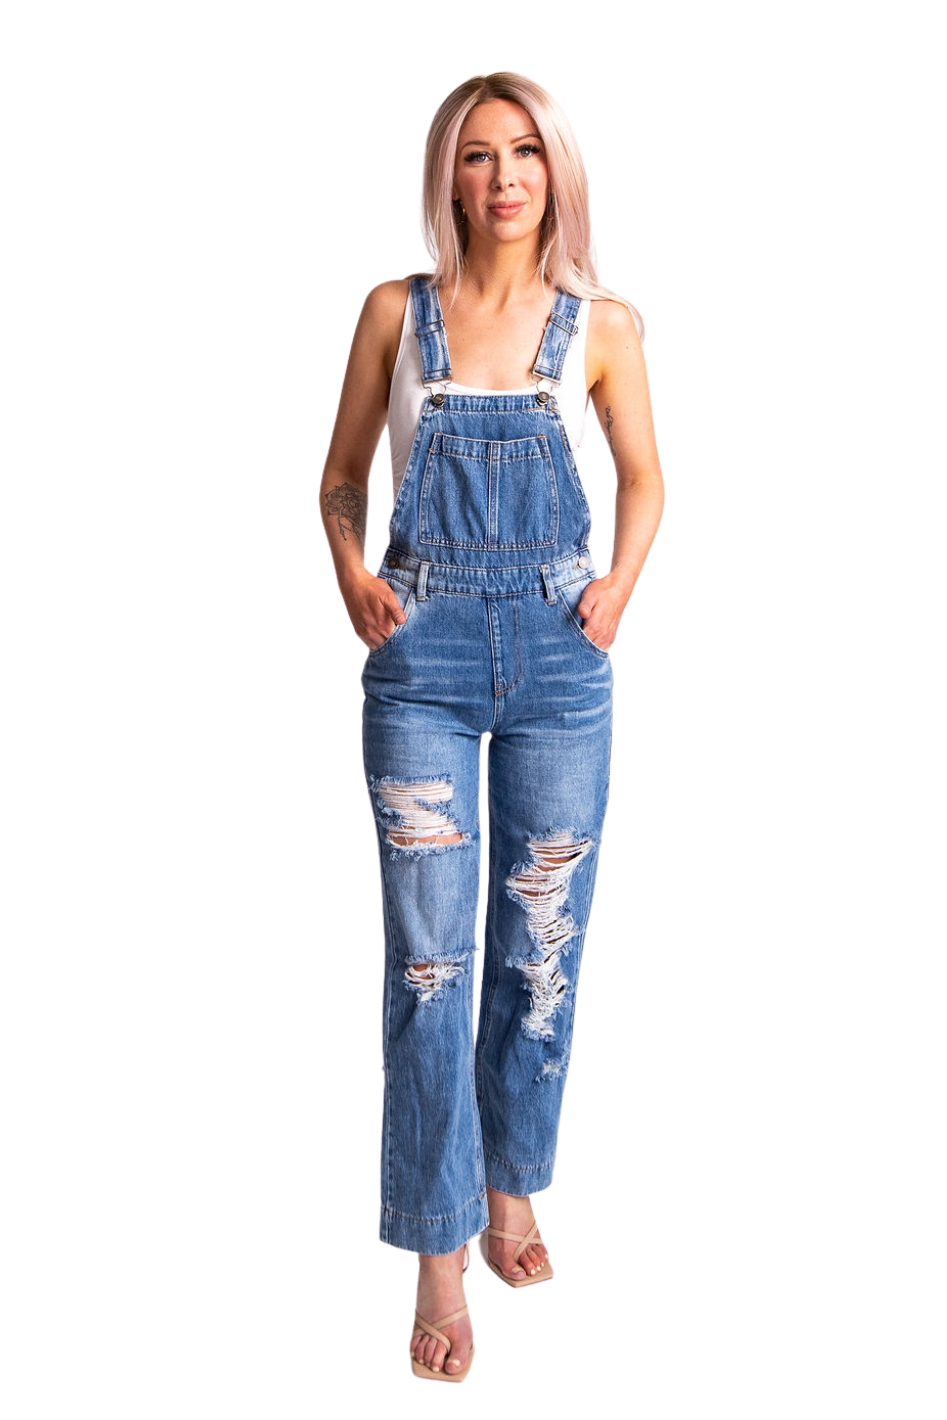 The Britches Wide Leg Distressed Overall - Expressive Collective CO.